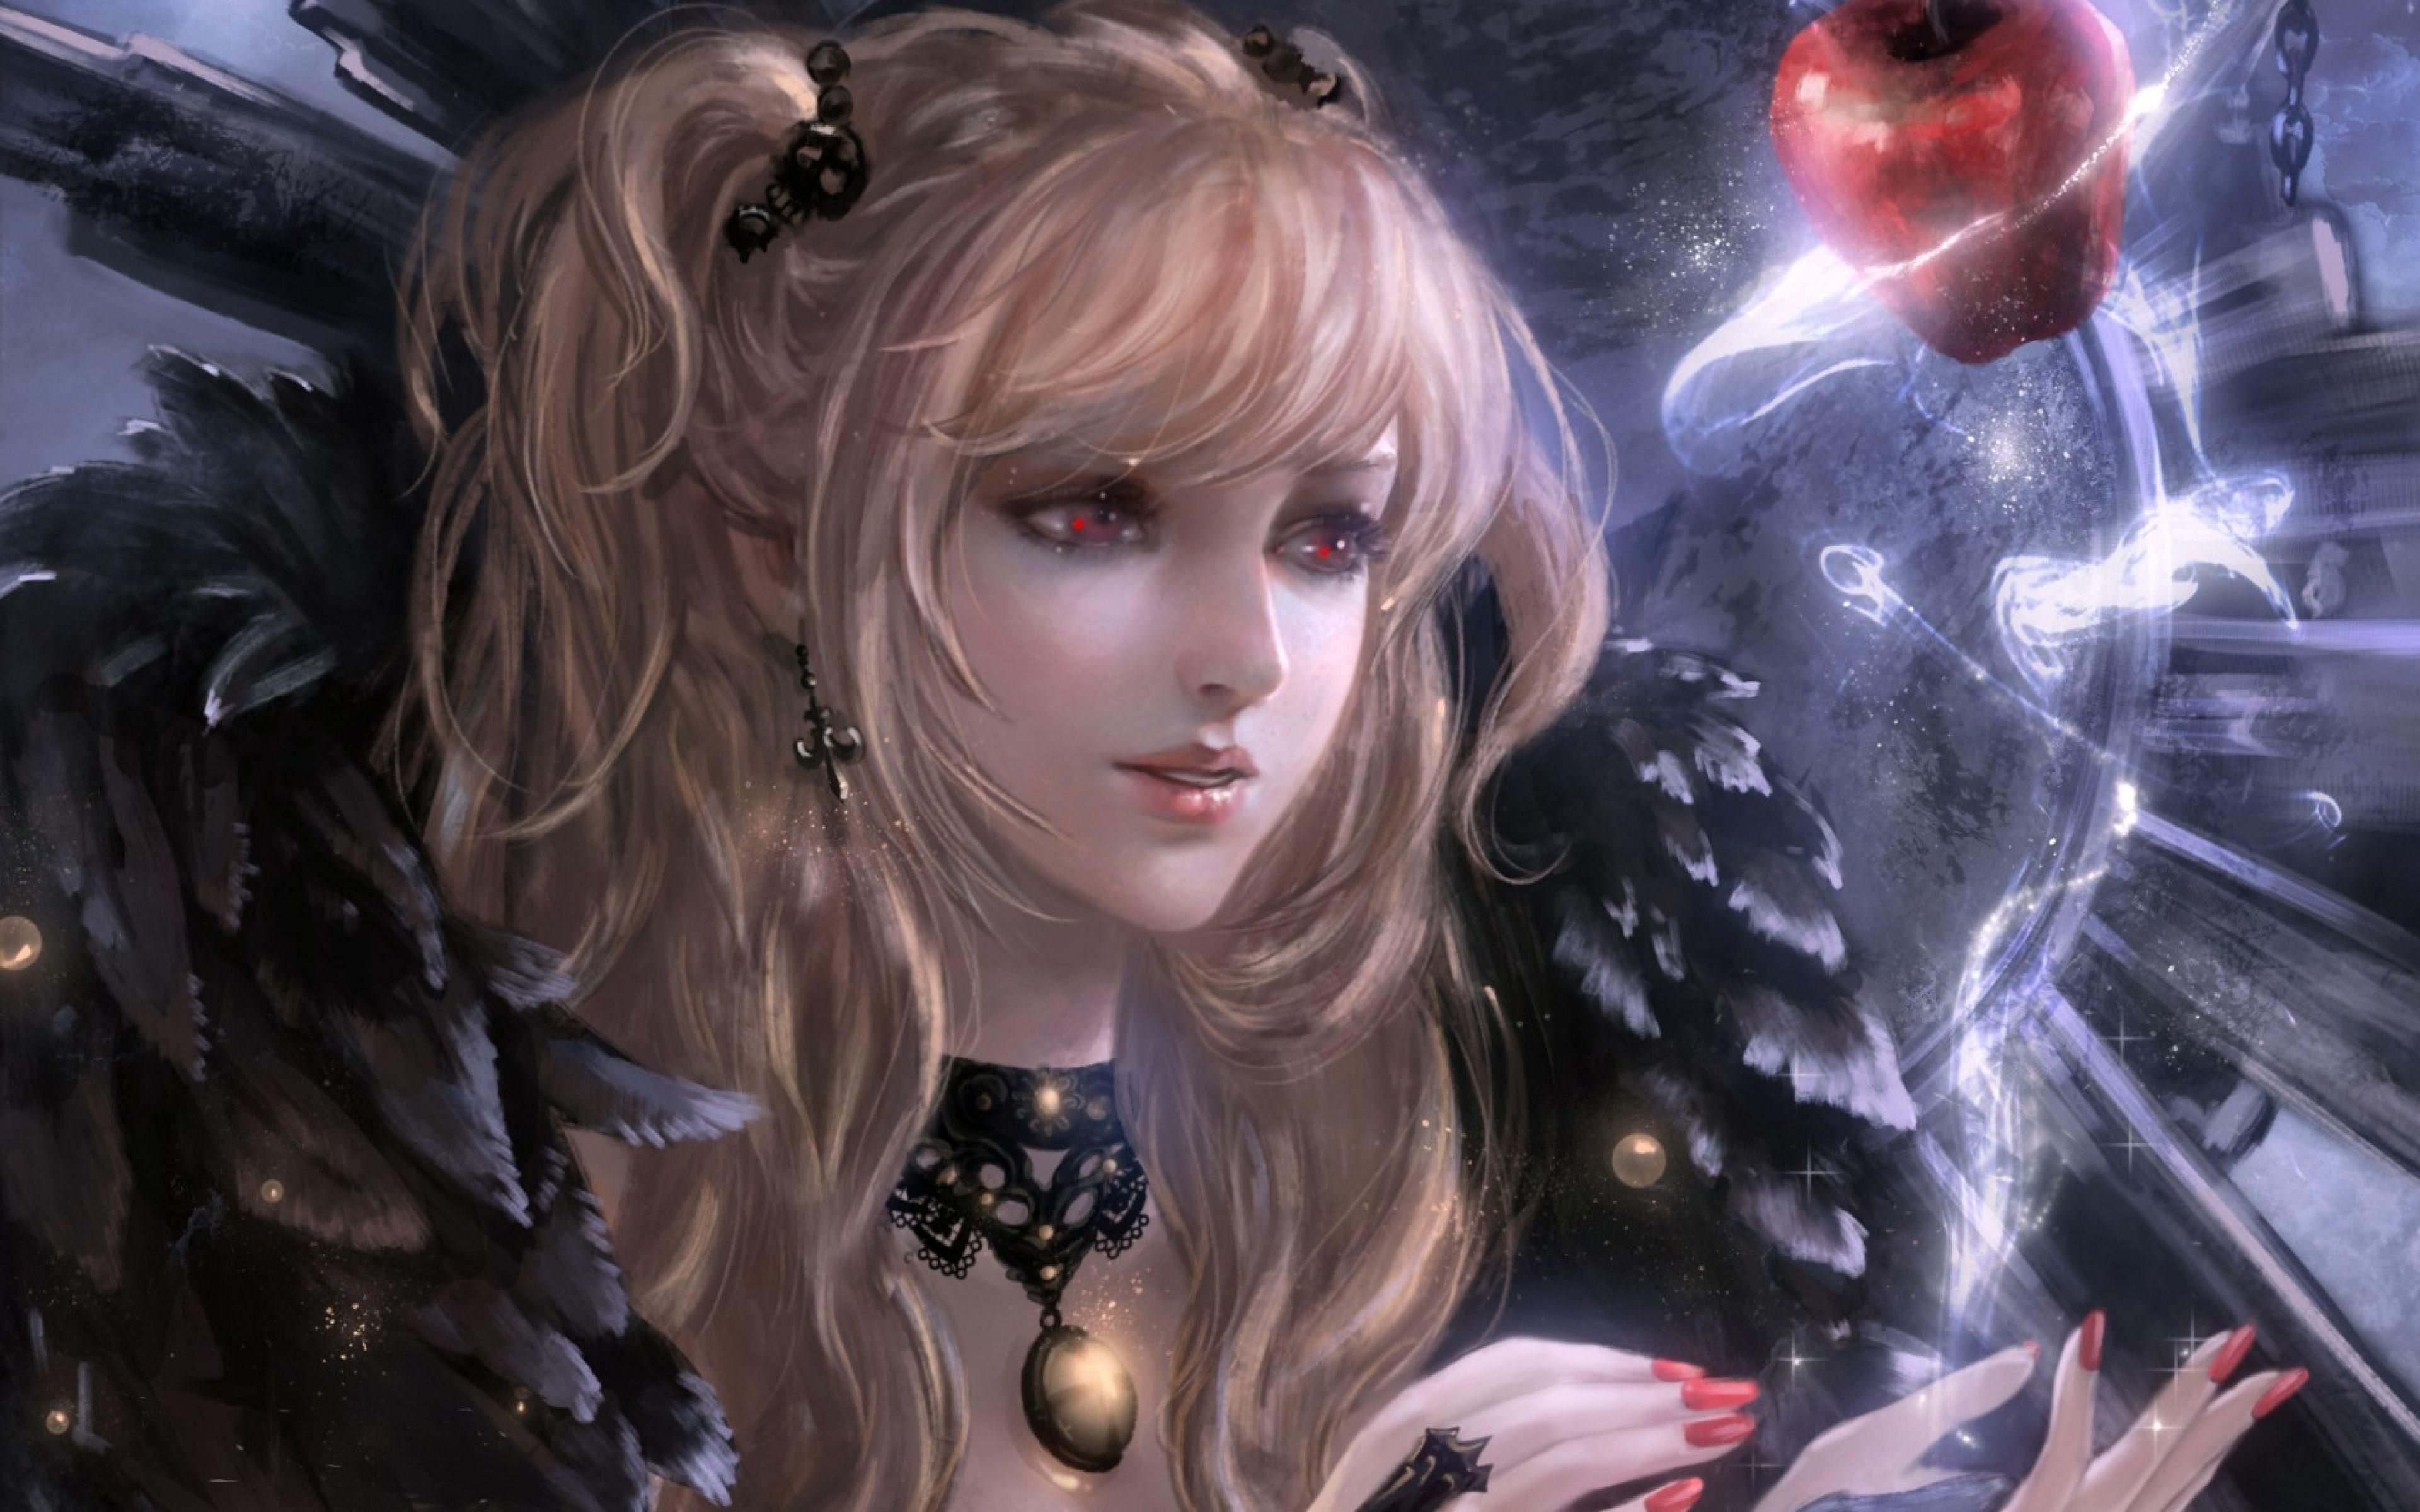 2. Misa Amane from Death Note - wide 8